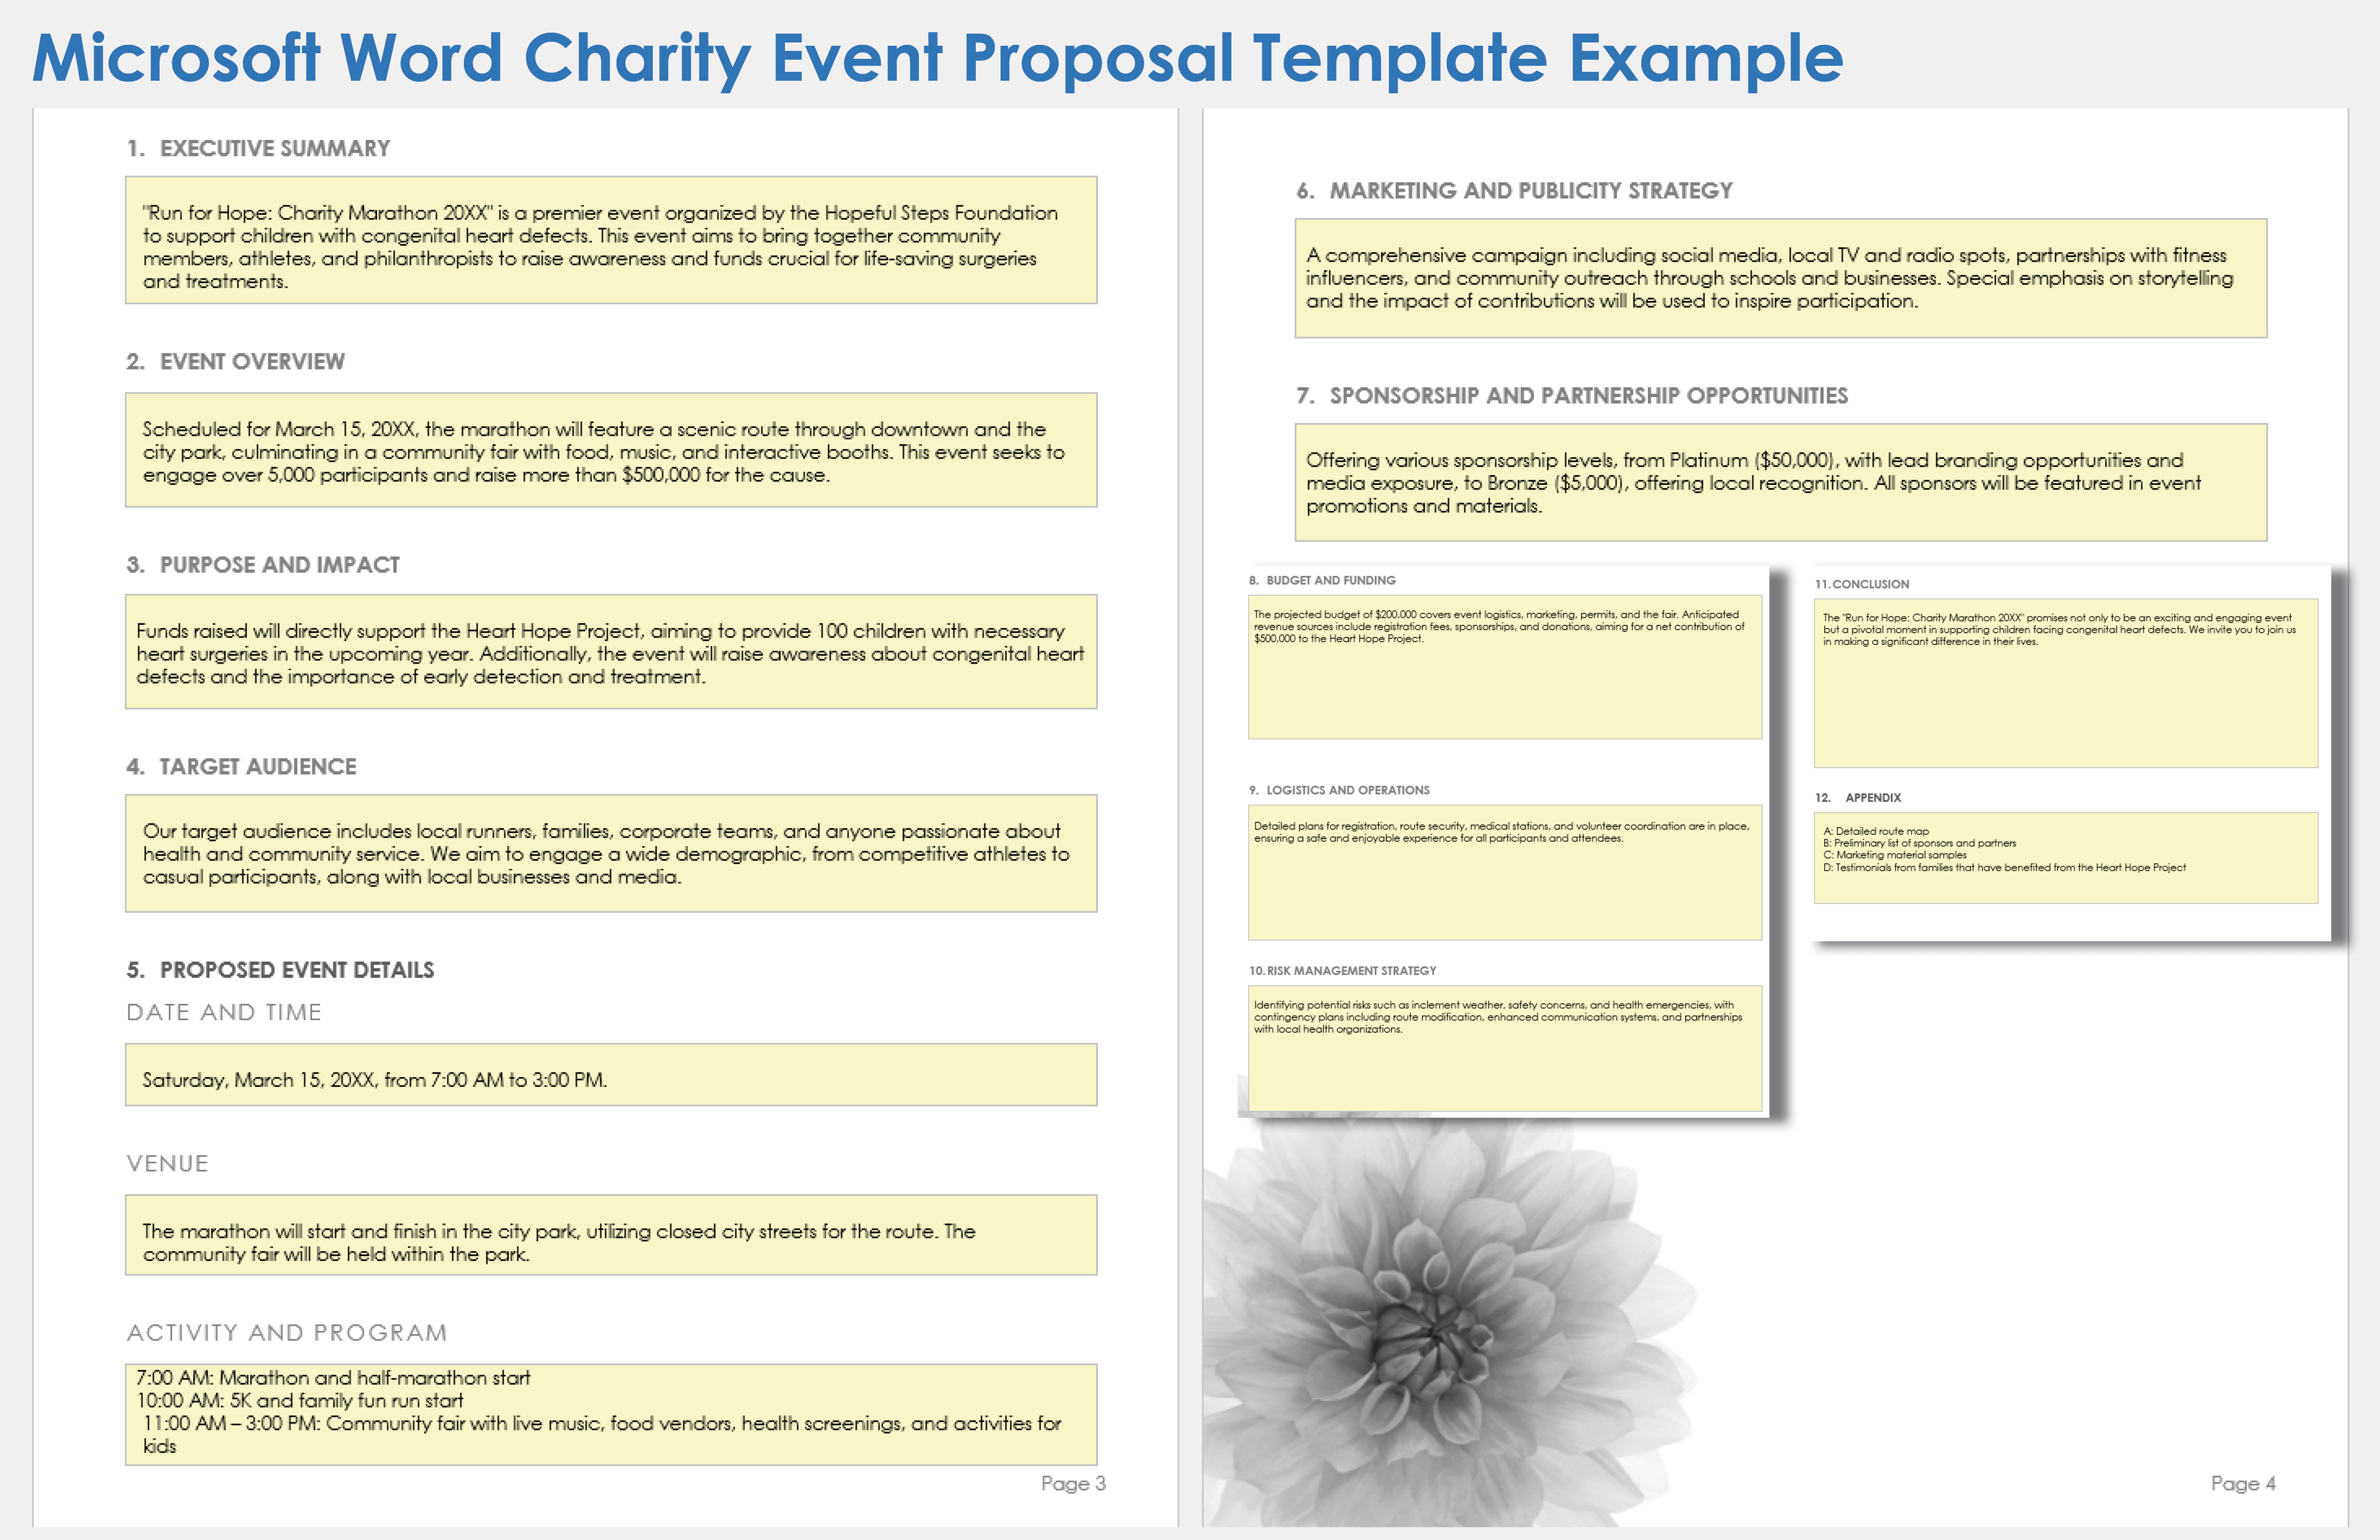 Microsoft Word Charity Event Proposal Template Example